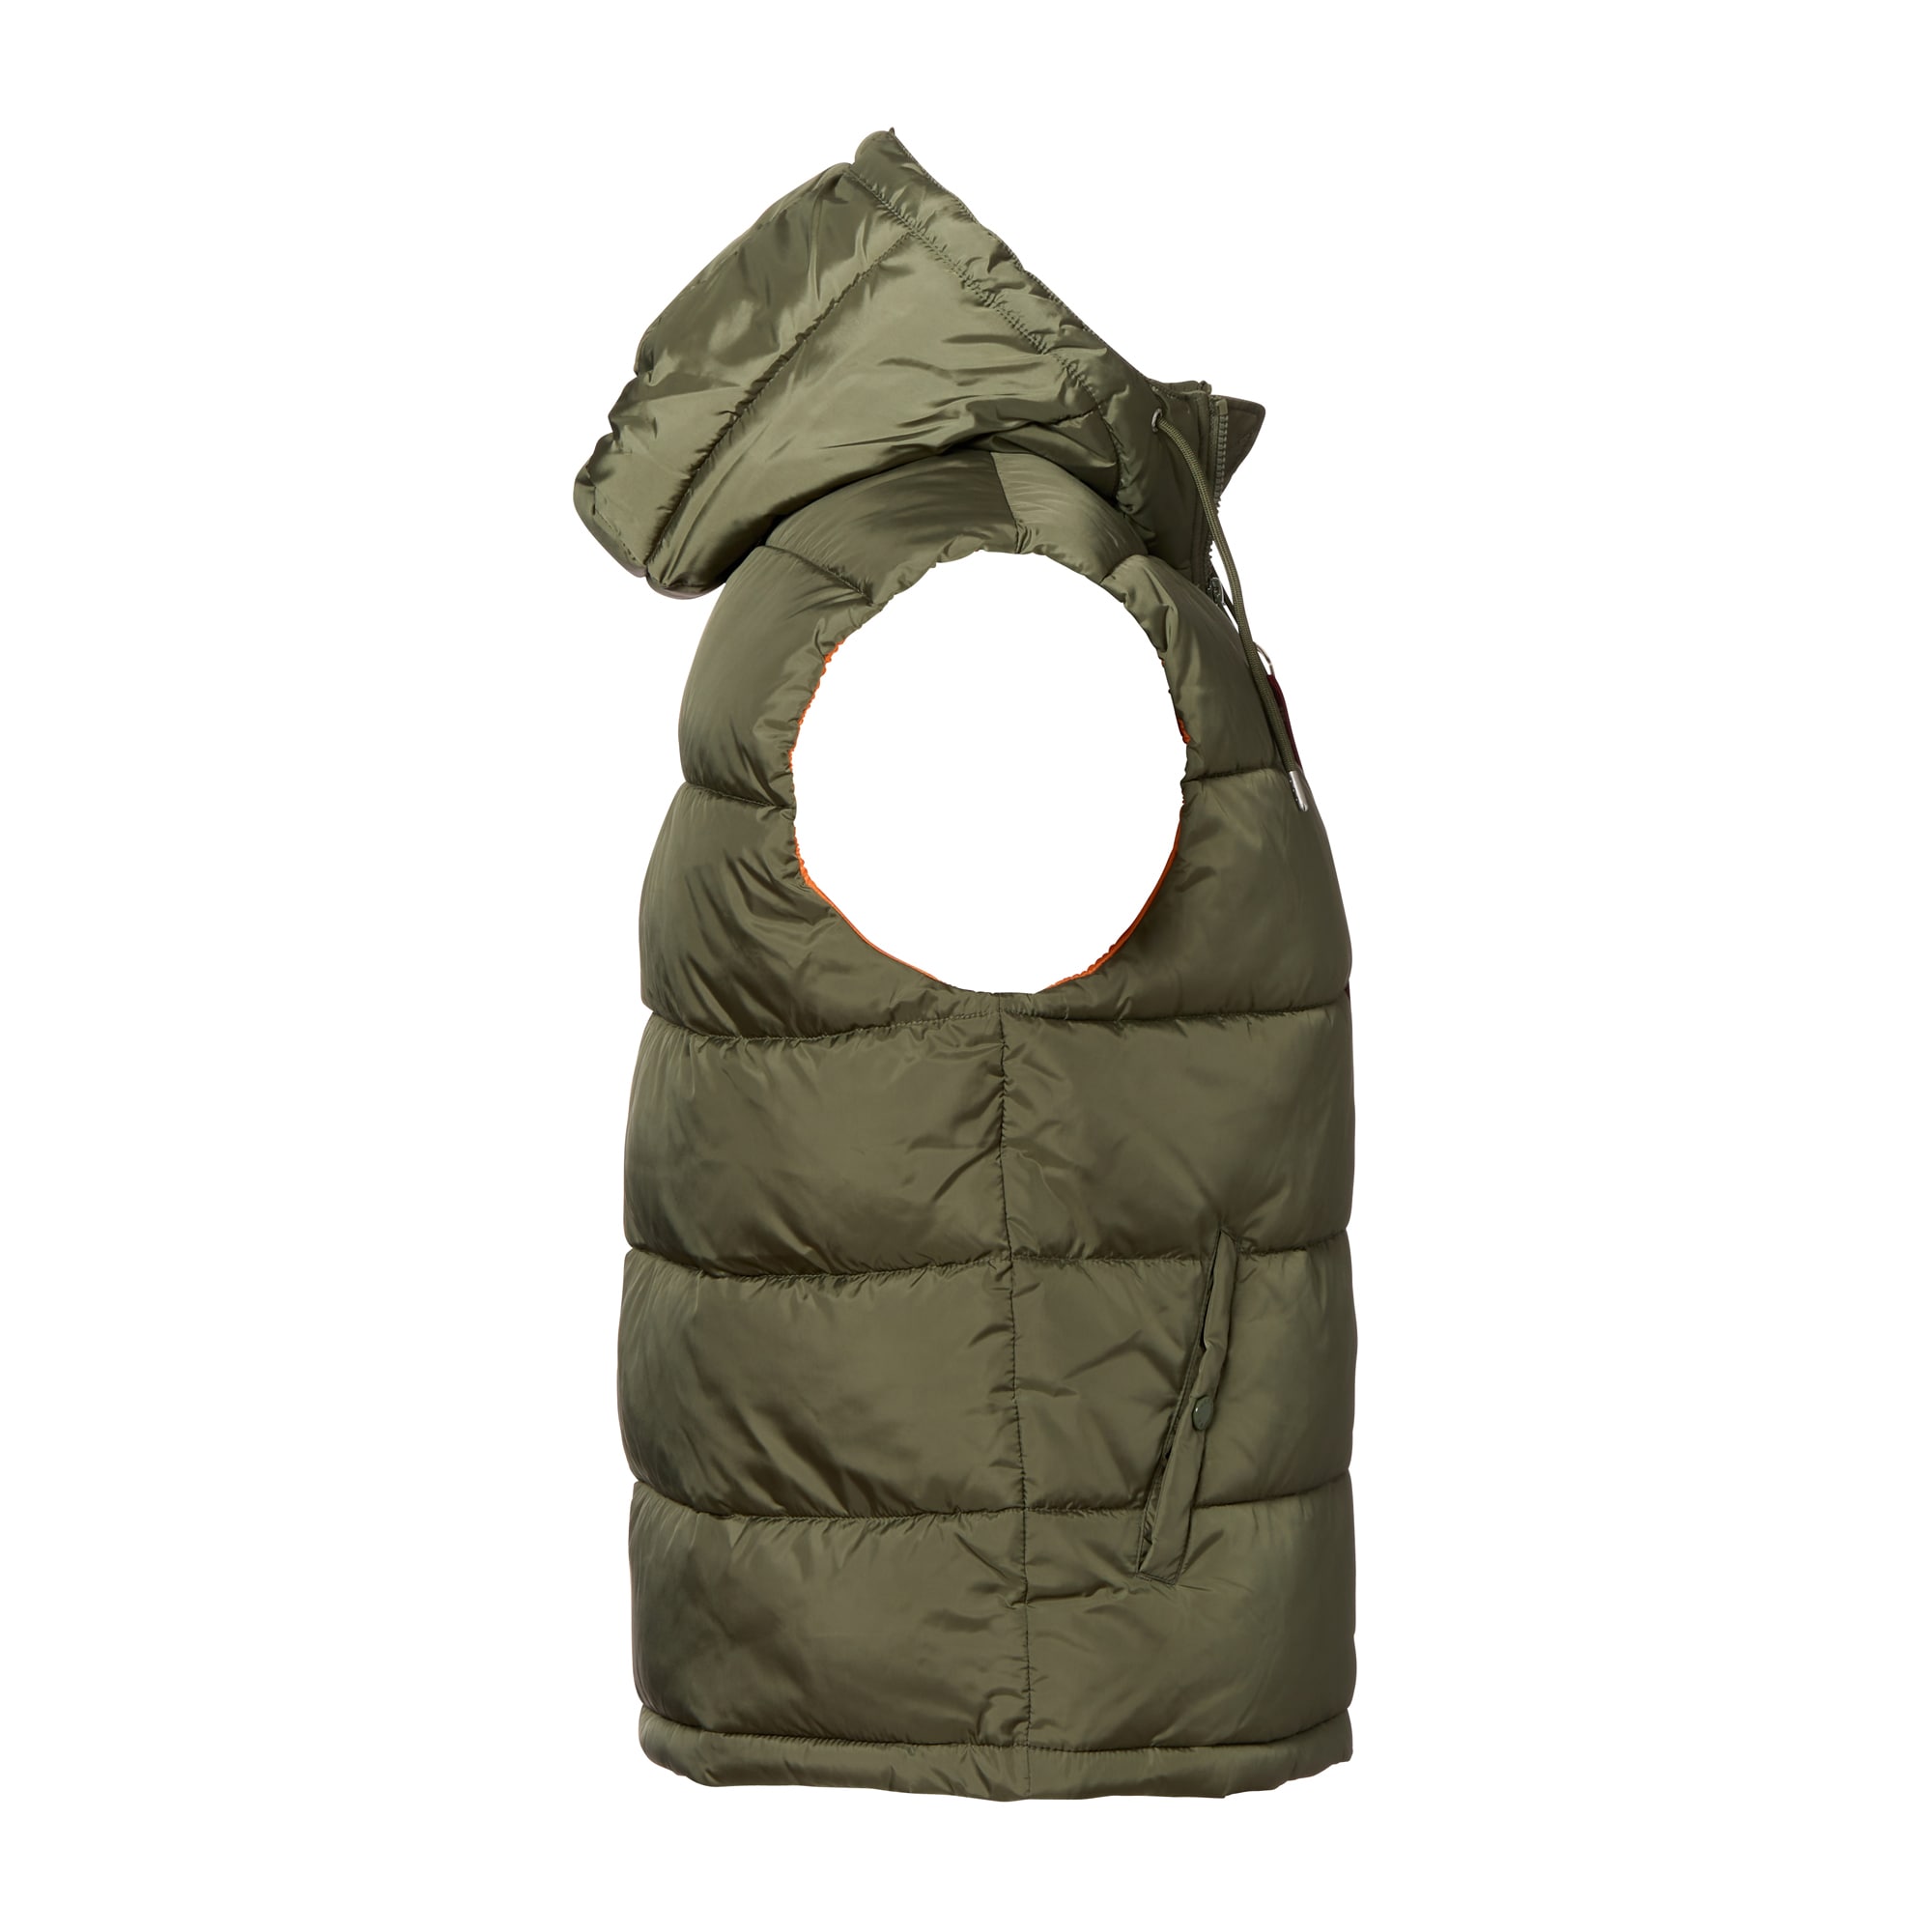 Purchase the Alpha Industries Hooded Puffer Vest FD sage green